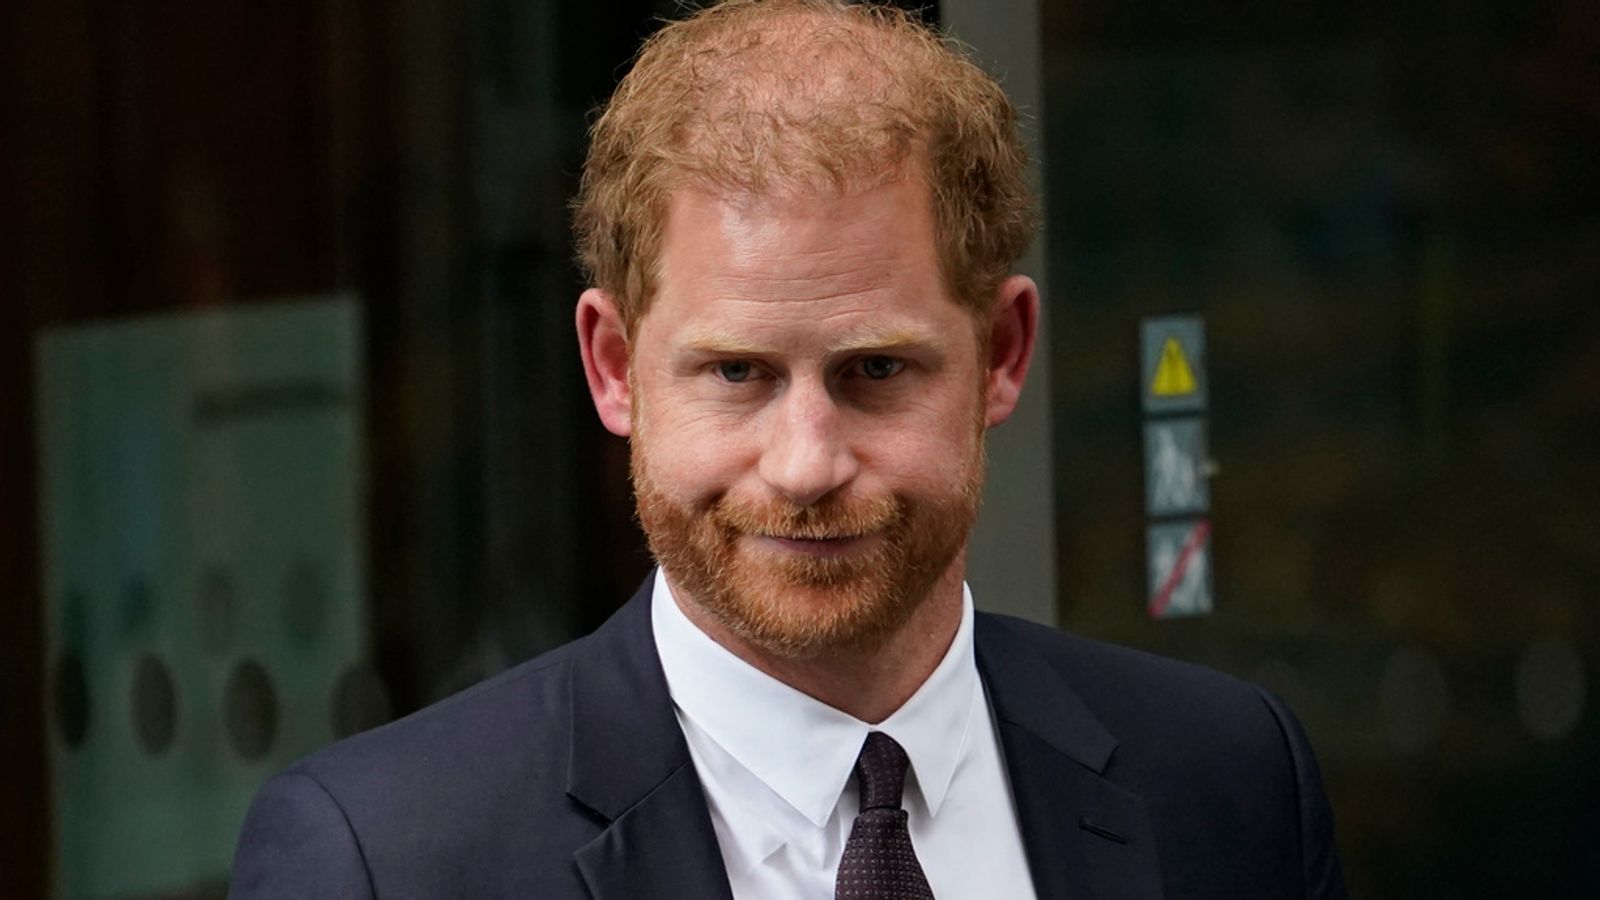 Prince Harry privacy case: 'Extensive' phone hacking by Mirror Group newspapers was carried out